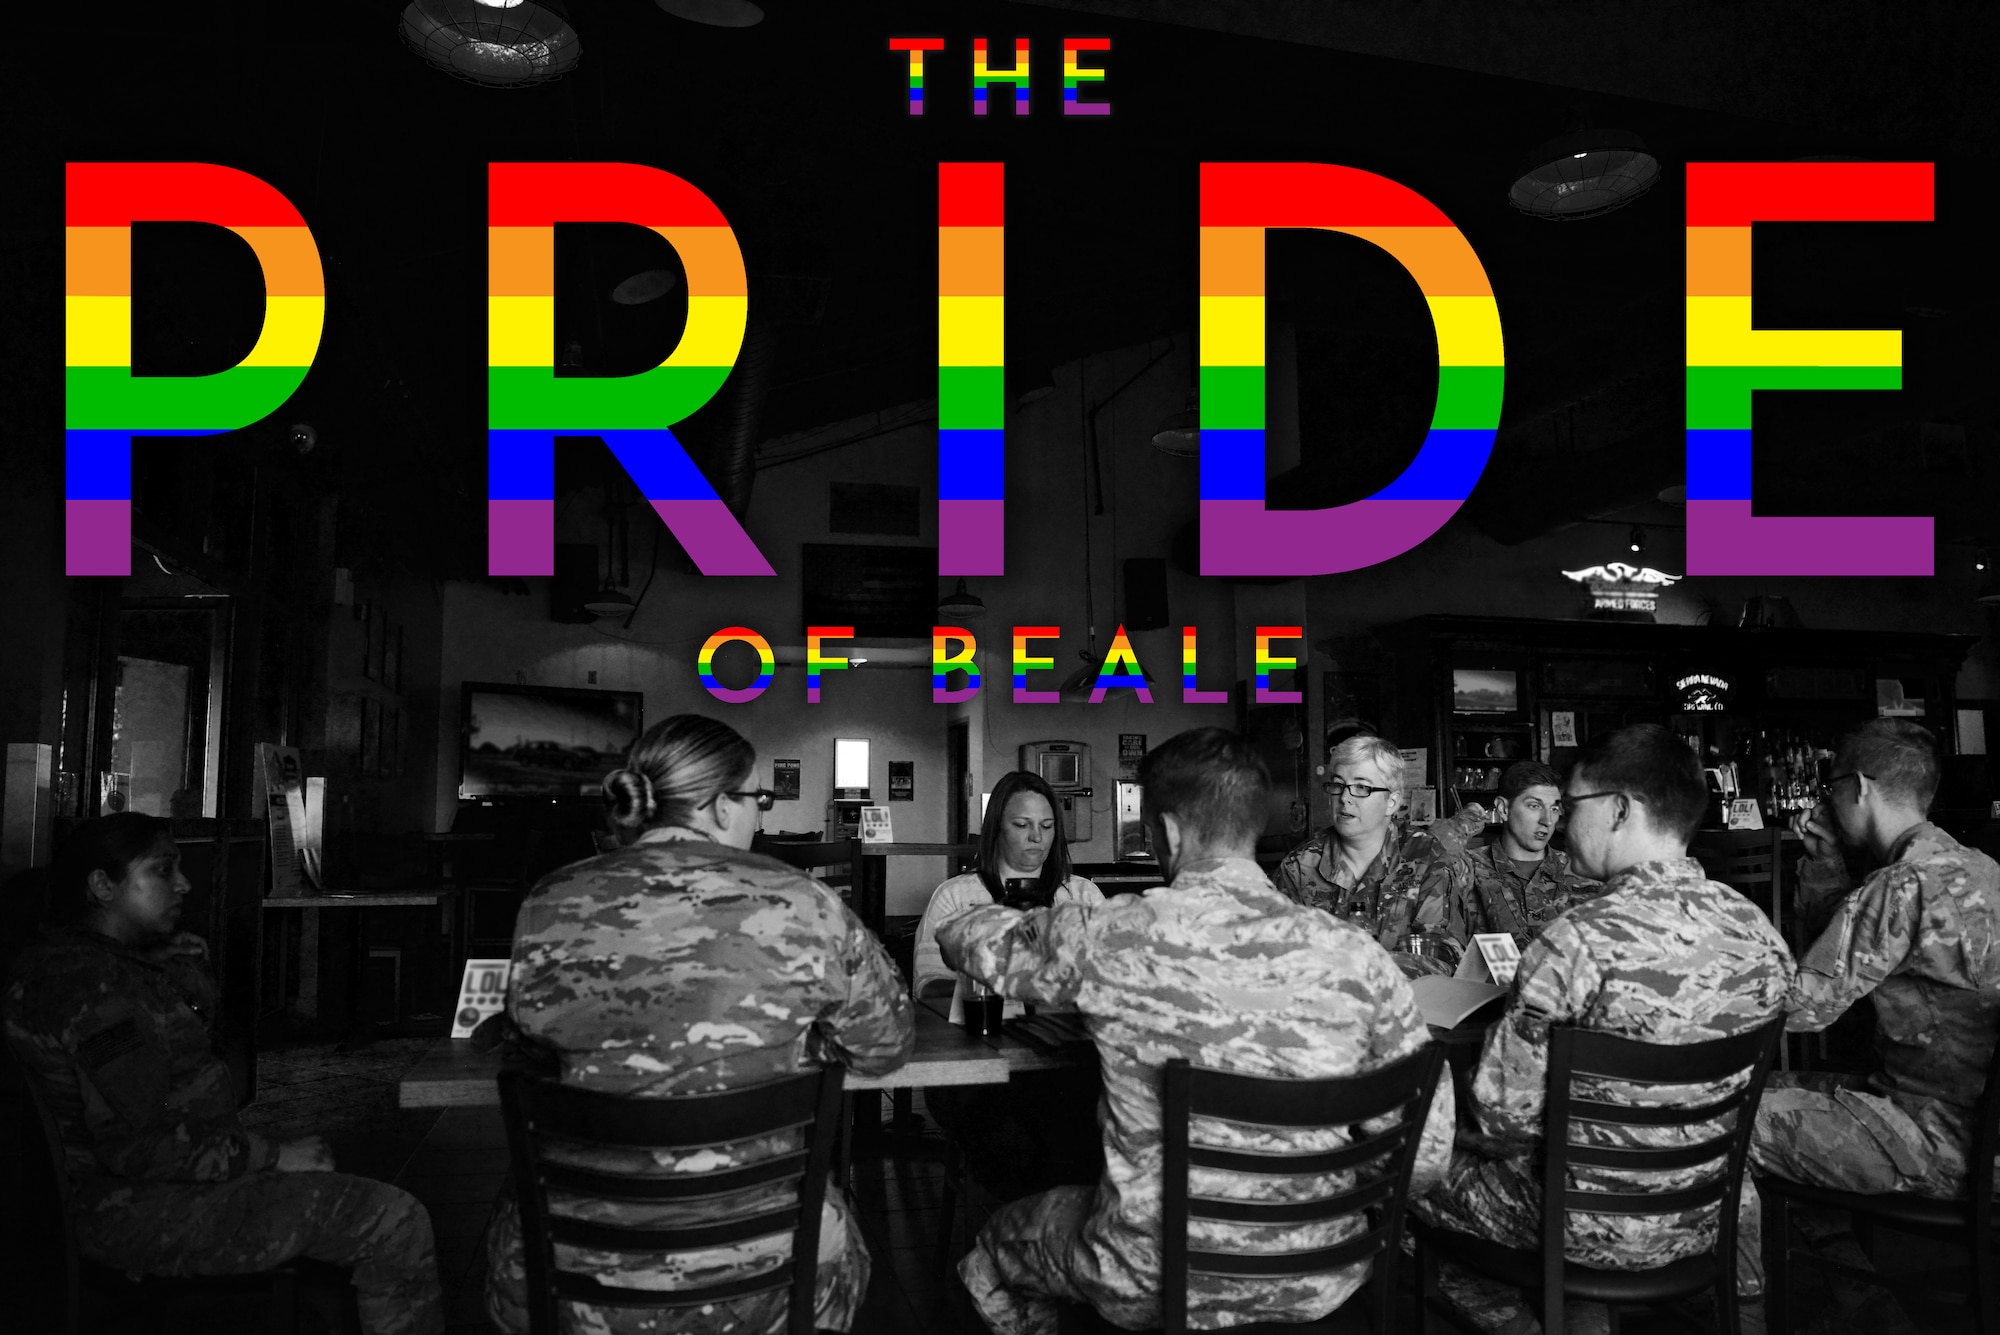 Multiple members of the Beale Air Force Base LGBTQ group gather at their usual meeting spot at the base pub. The graphic with rainbow letters saying "The Pride of Beale" is superimposed above them.